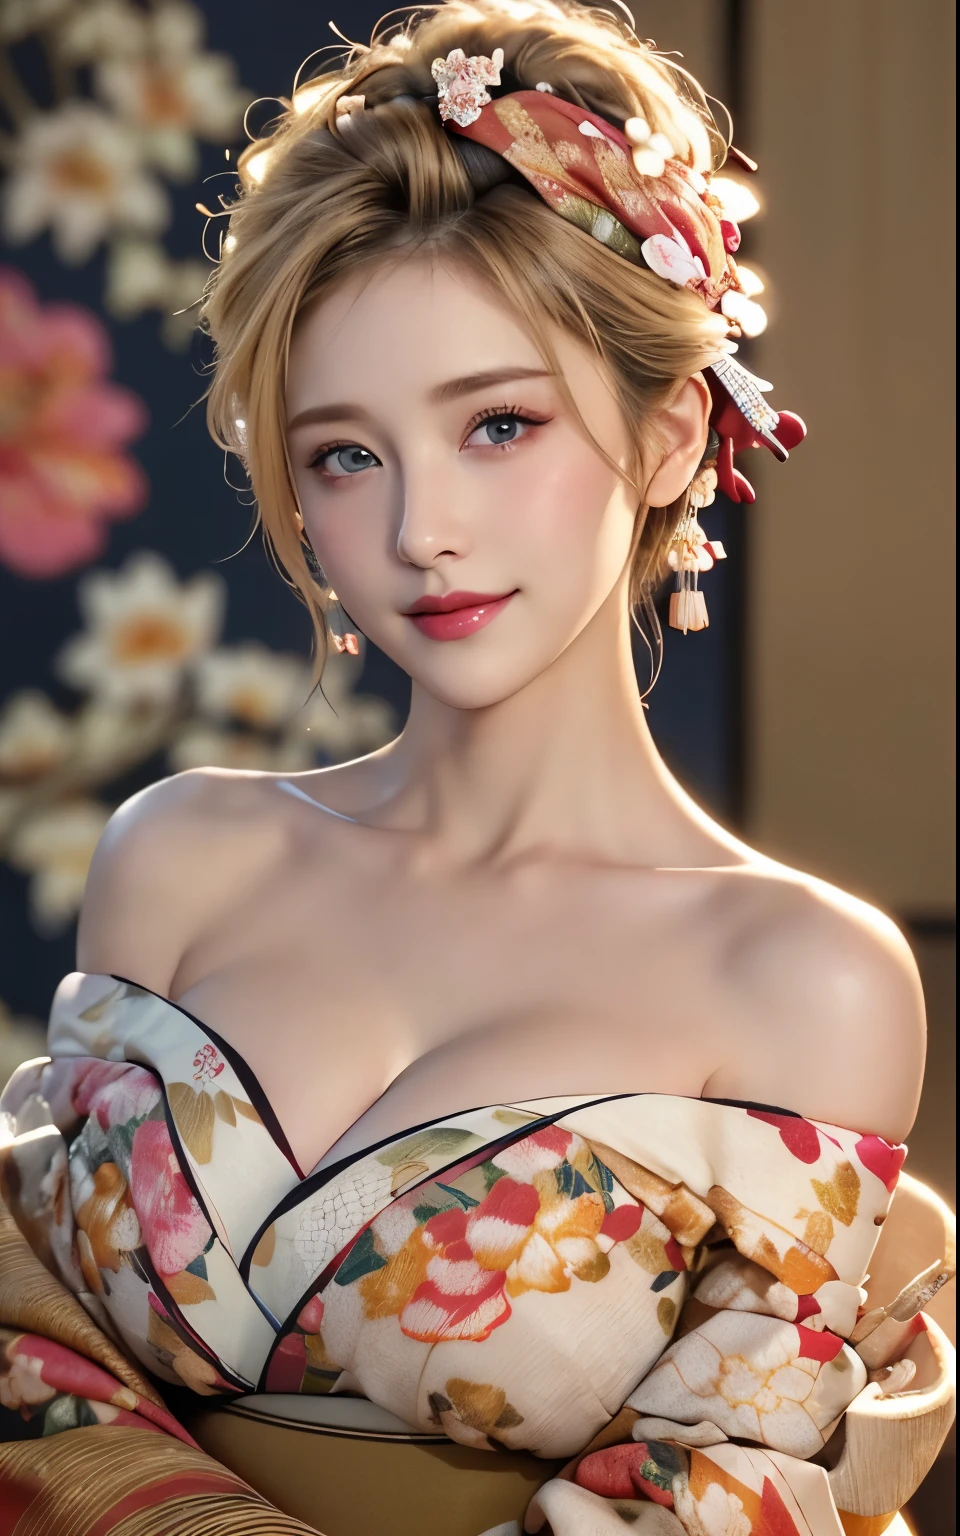 Realistic:1.8、bionde、Italian、highest quality、1 girl、,Glowing Skin、Professional Lighting,Photorealistic、Perfect body、super high quality、Ultra-high Realistic image quality、Japanese、(Off-the-shoulder short length floral print kimono:1.6)、(Cleavage:1.5)、Tight waist、(bionde:1.3)、(Blurred Background)、(Grin)、、blue eyes、bionde、Tattoos all over the body、short hair、Hair tied up、Full body photo、Sexy Face、short hair、 A look of complete lust、(((masterpiece)))、((highest quality))、((超Realistic))、Mature woman、Mature woman、perspective、Very detailed、The perfect temptation、Best image quality、Fine-grained image quality、beautiful、European, woman, French, woman Italian, Italian, smile、blue eyes、jewelry, blue eyes, Realistic, High resolution, Soft Light,Hip Up, Glowing Skin, (Detailed face),tattoo, jewelry, , night, bionde, Wavy Hair,attractive appearance, smile, Perfect Style, perfect balance,